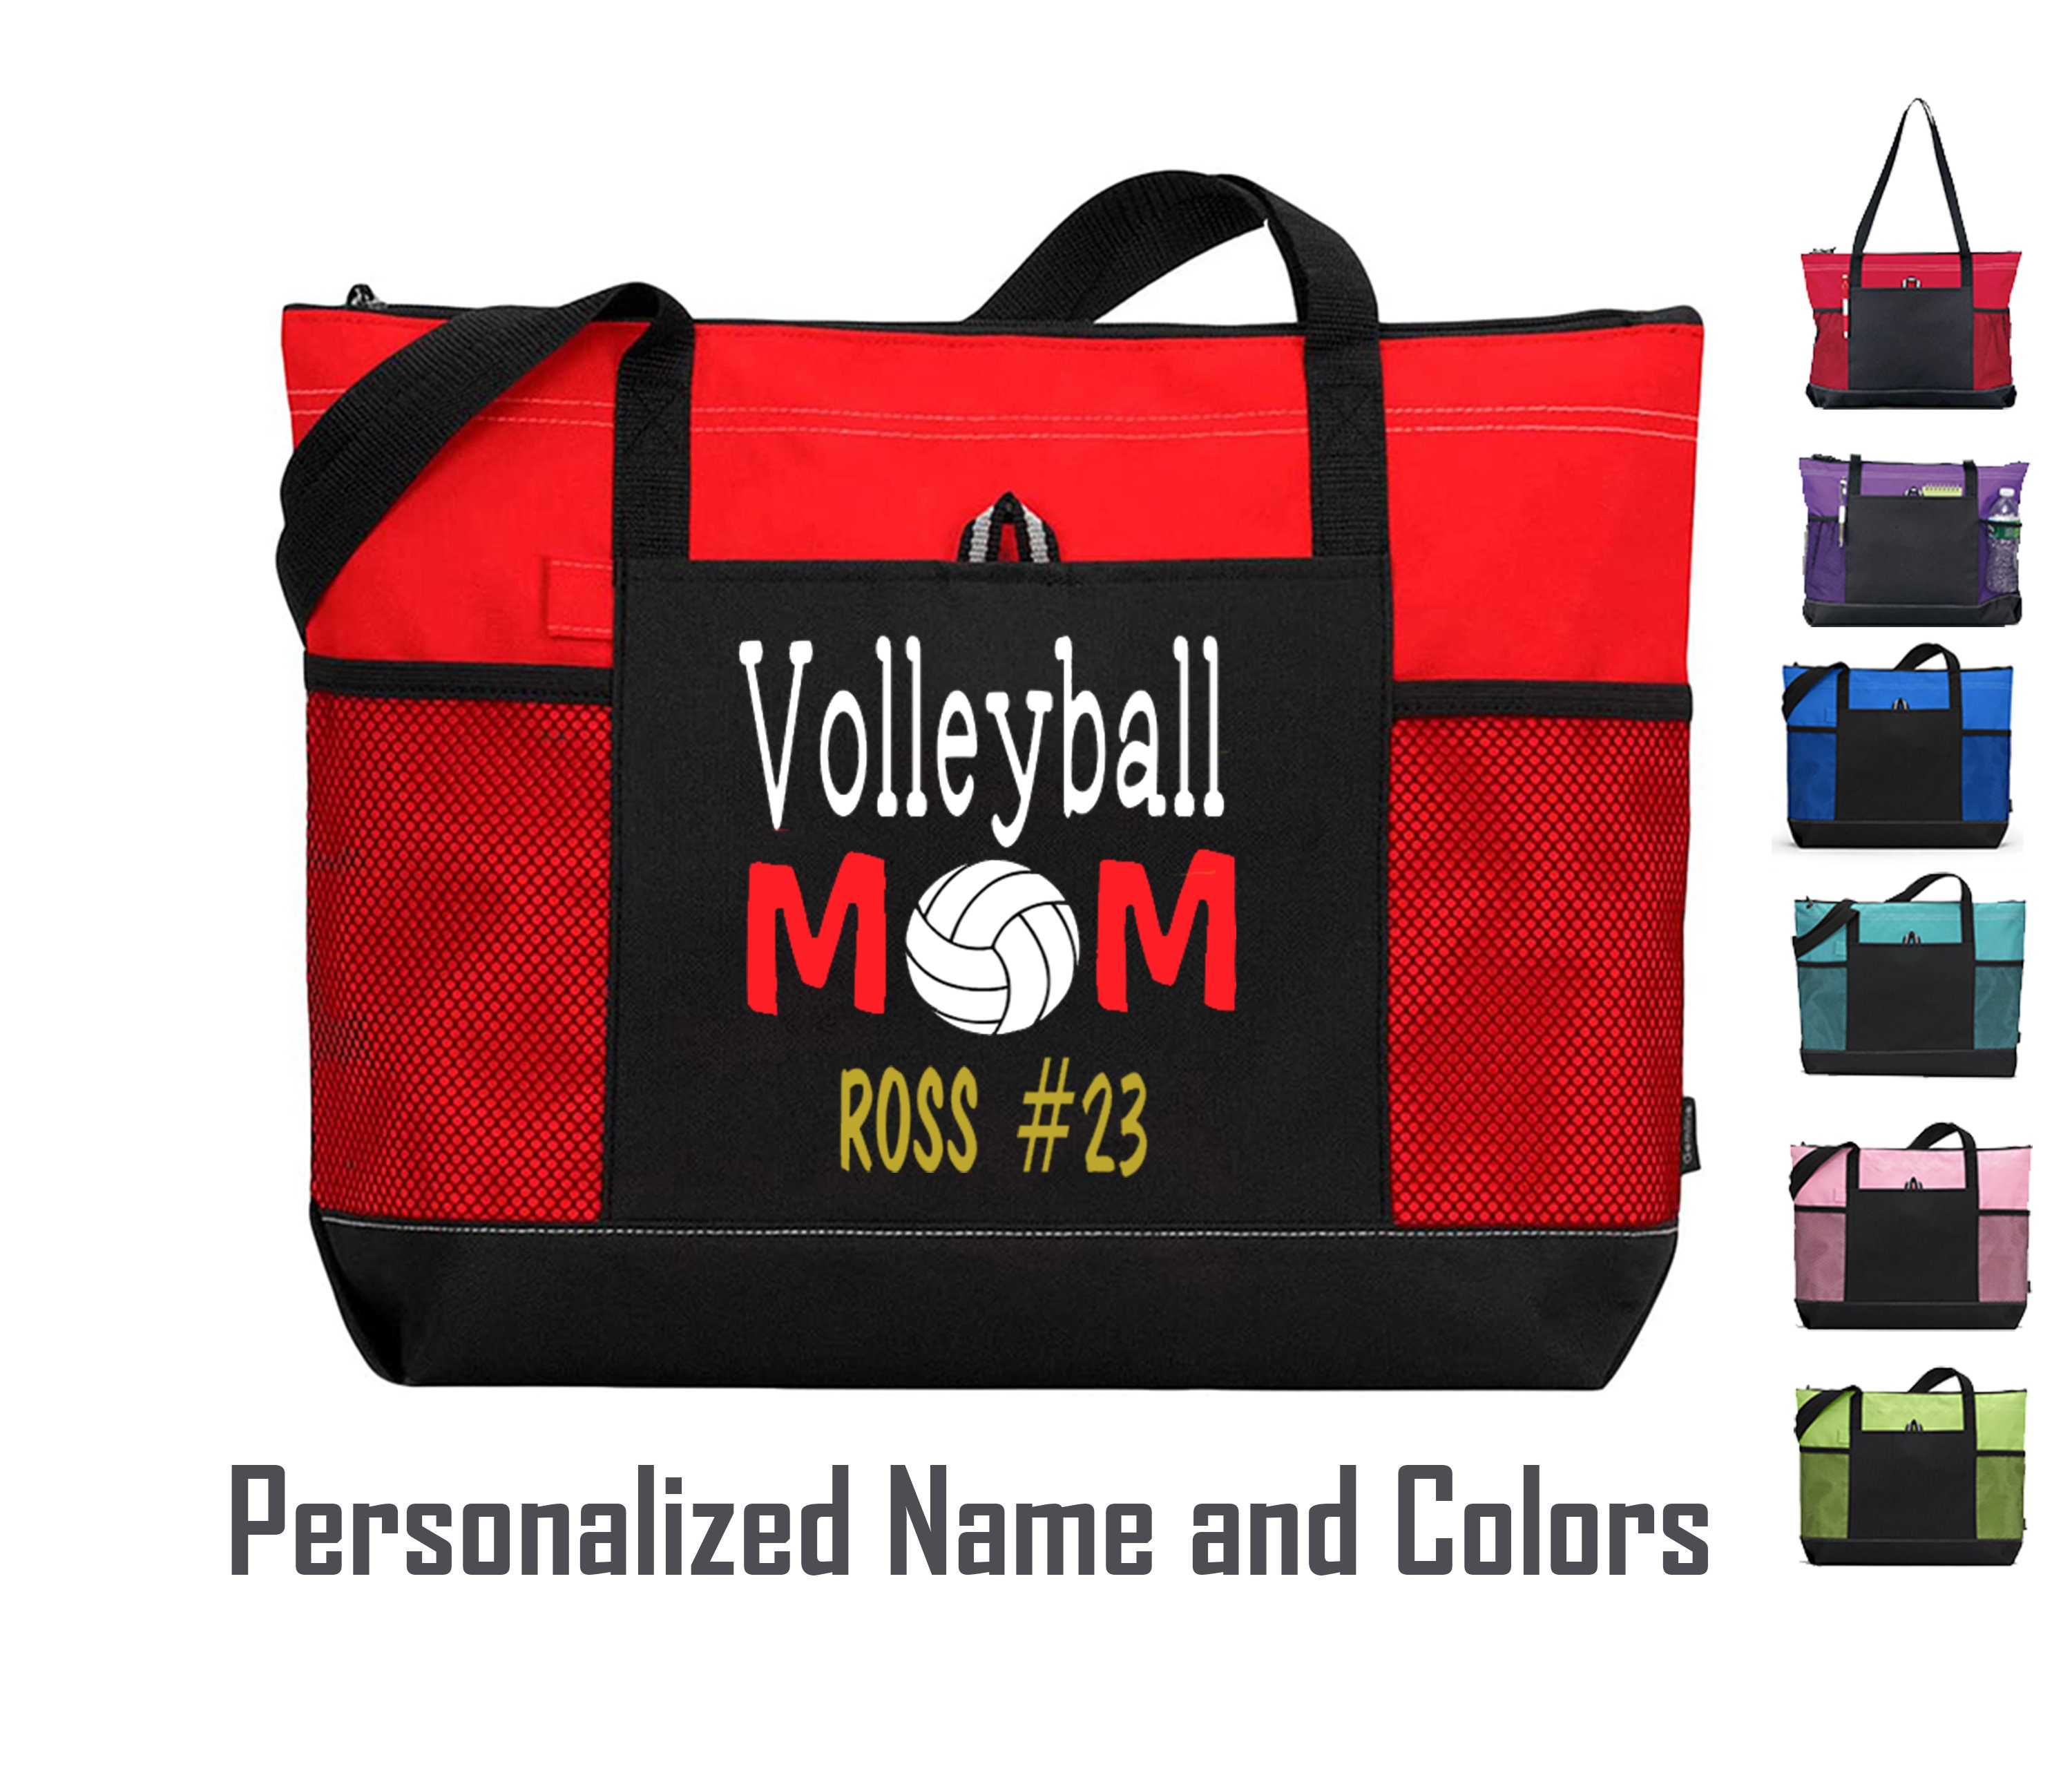 Blue Volleyball Bags. Nike.com